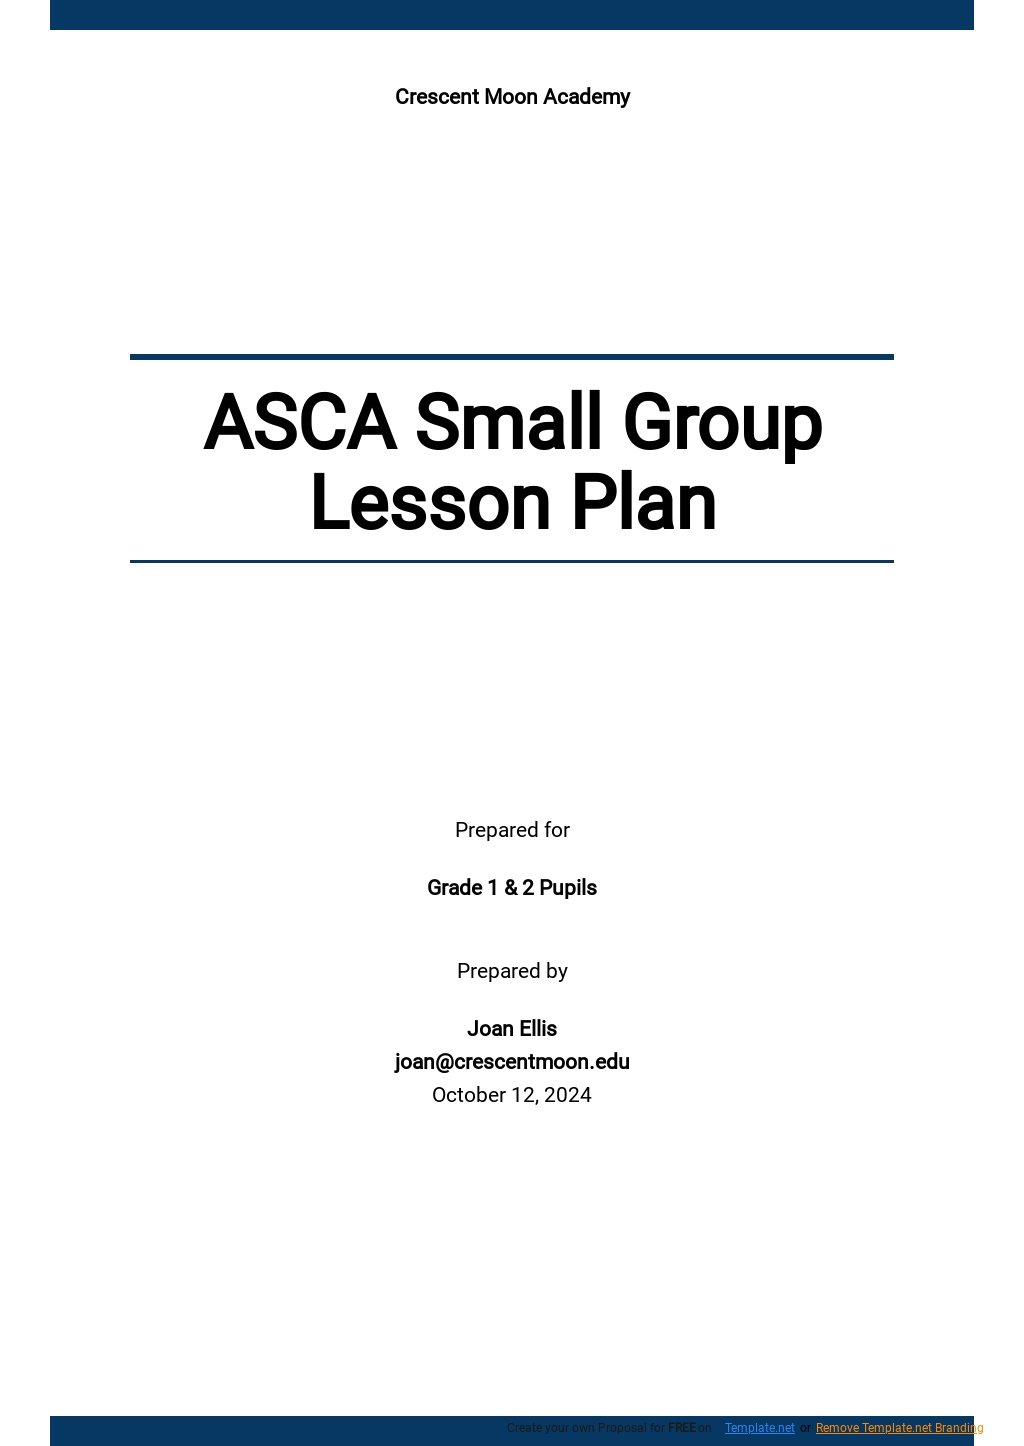 ASCA Small Group Lesson Plan Template.jpe